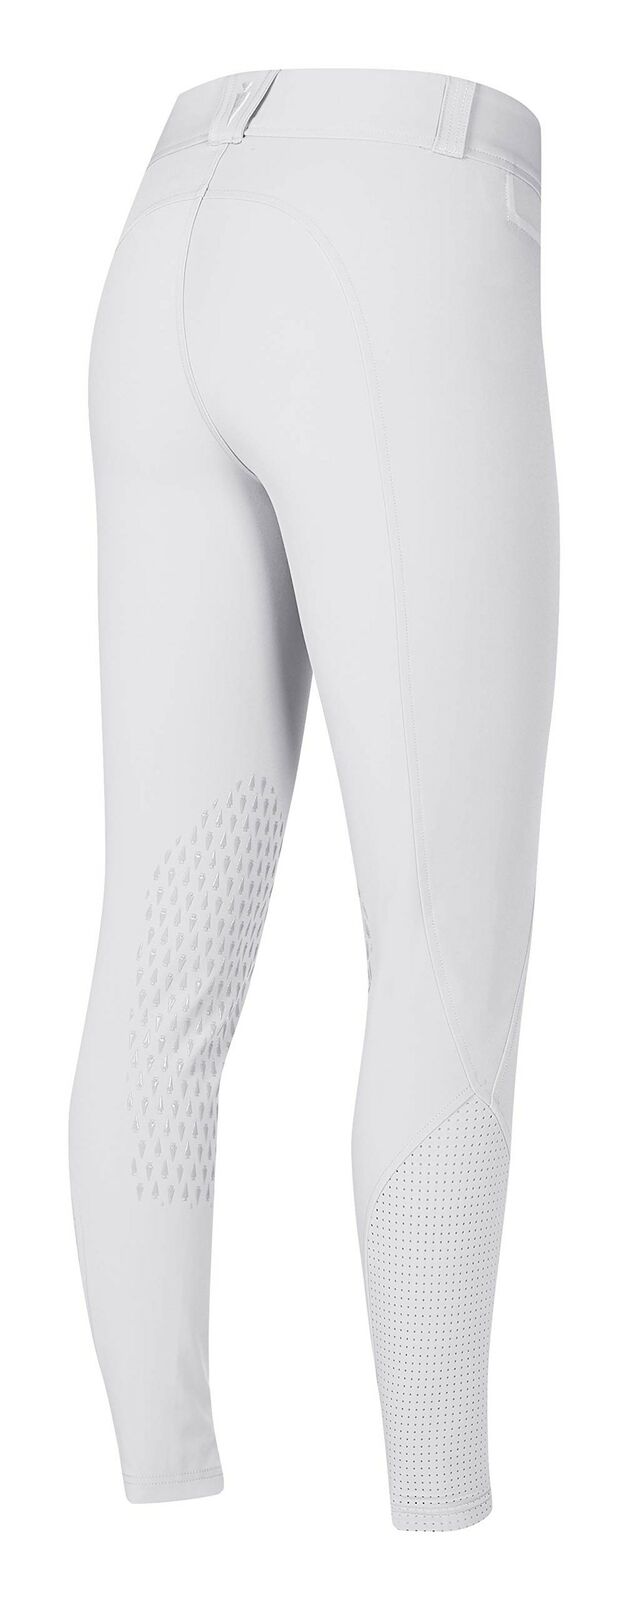 Back side of white Kerrits Affinity Women's IceFil Knee Patch Breeches